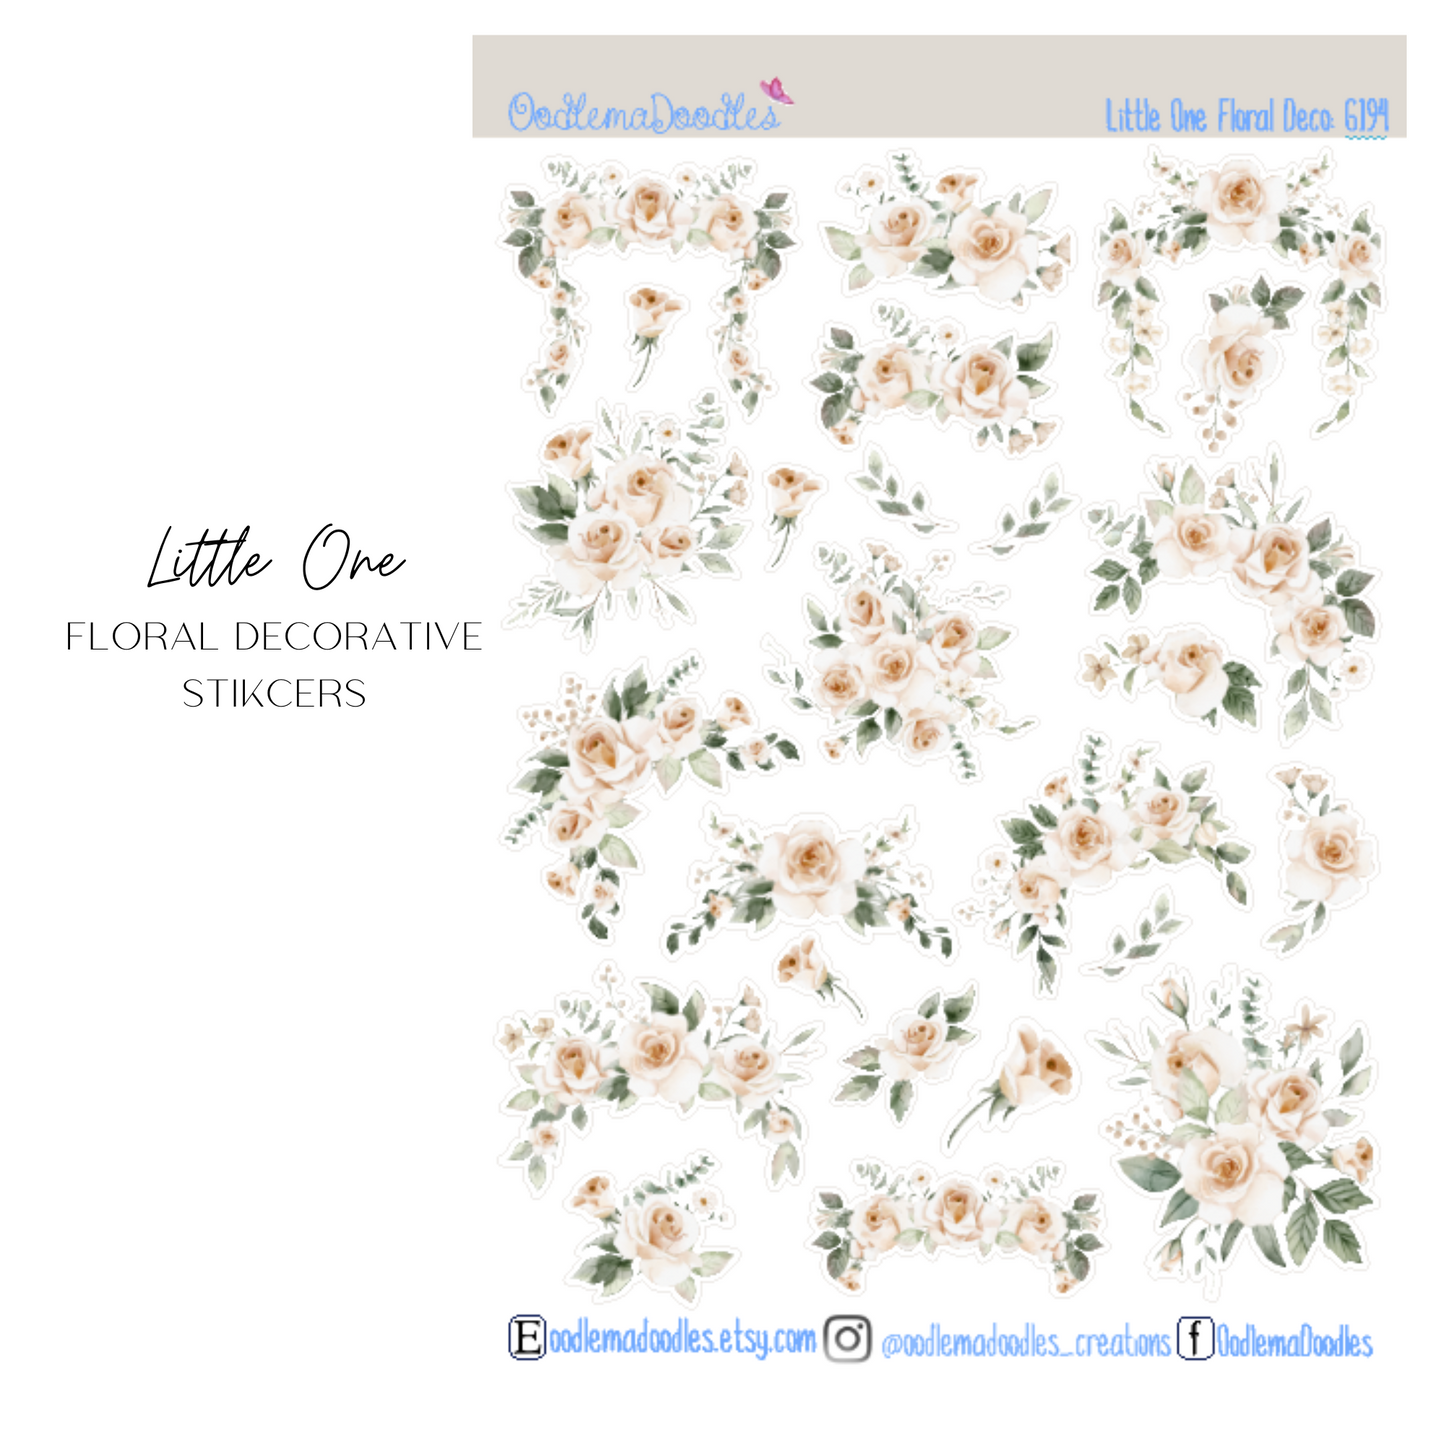 Little One Floral Decorative Stickers